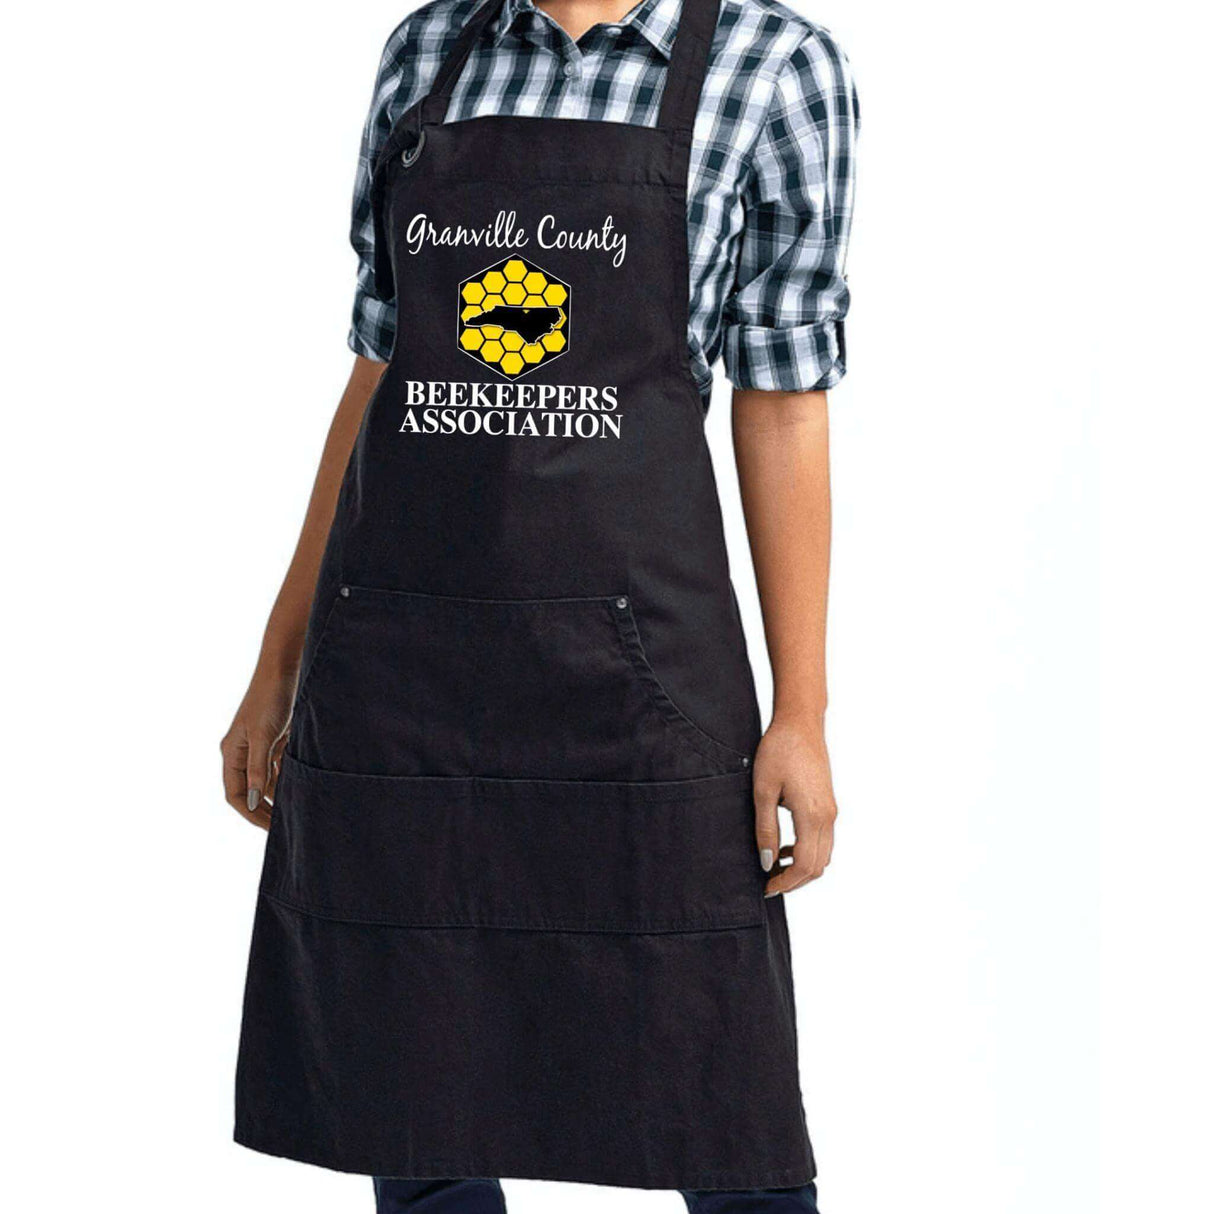 Granville County Beekeepers Association Pocketed Apron - Winks Design Studio,LLC